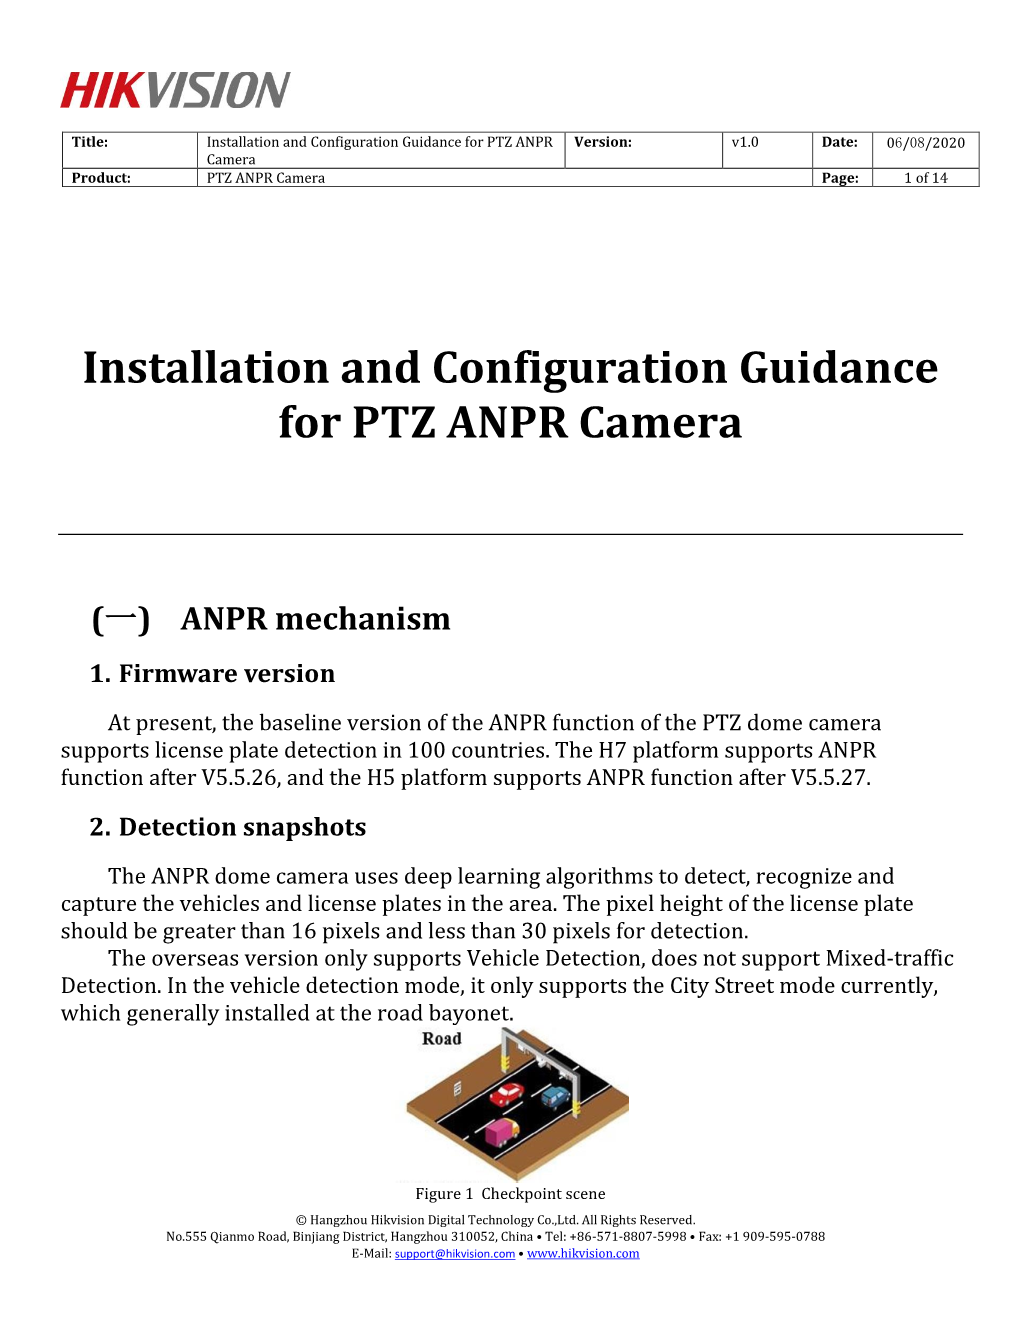 Installation and Configuration Guidance for PTZ ANPR Camera